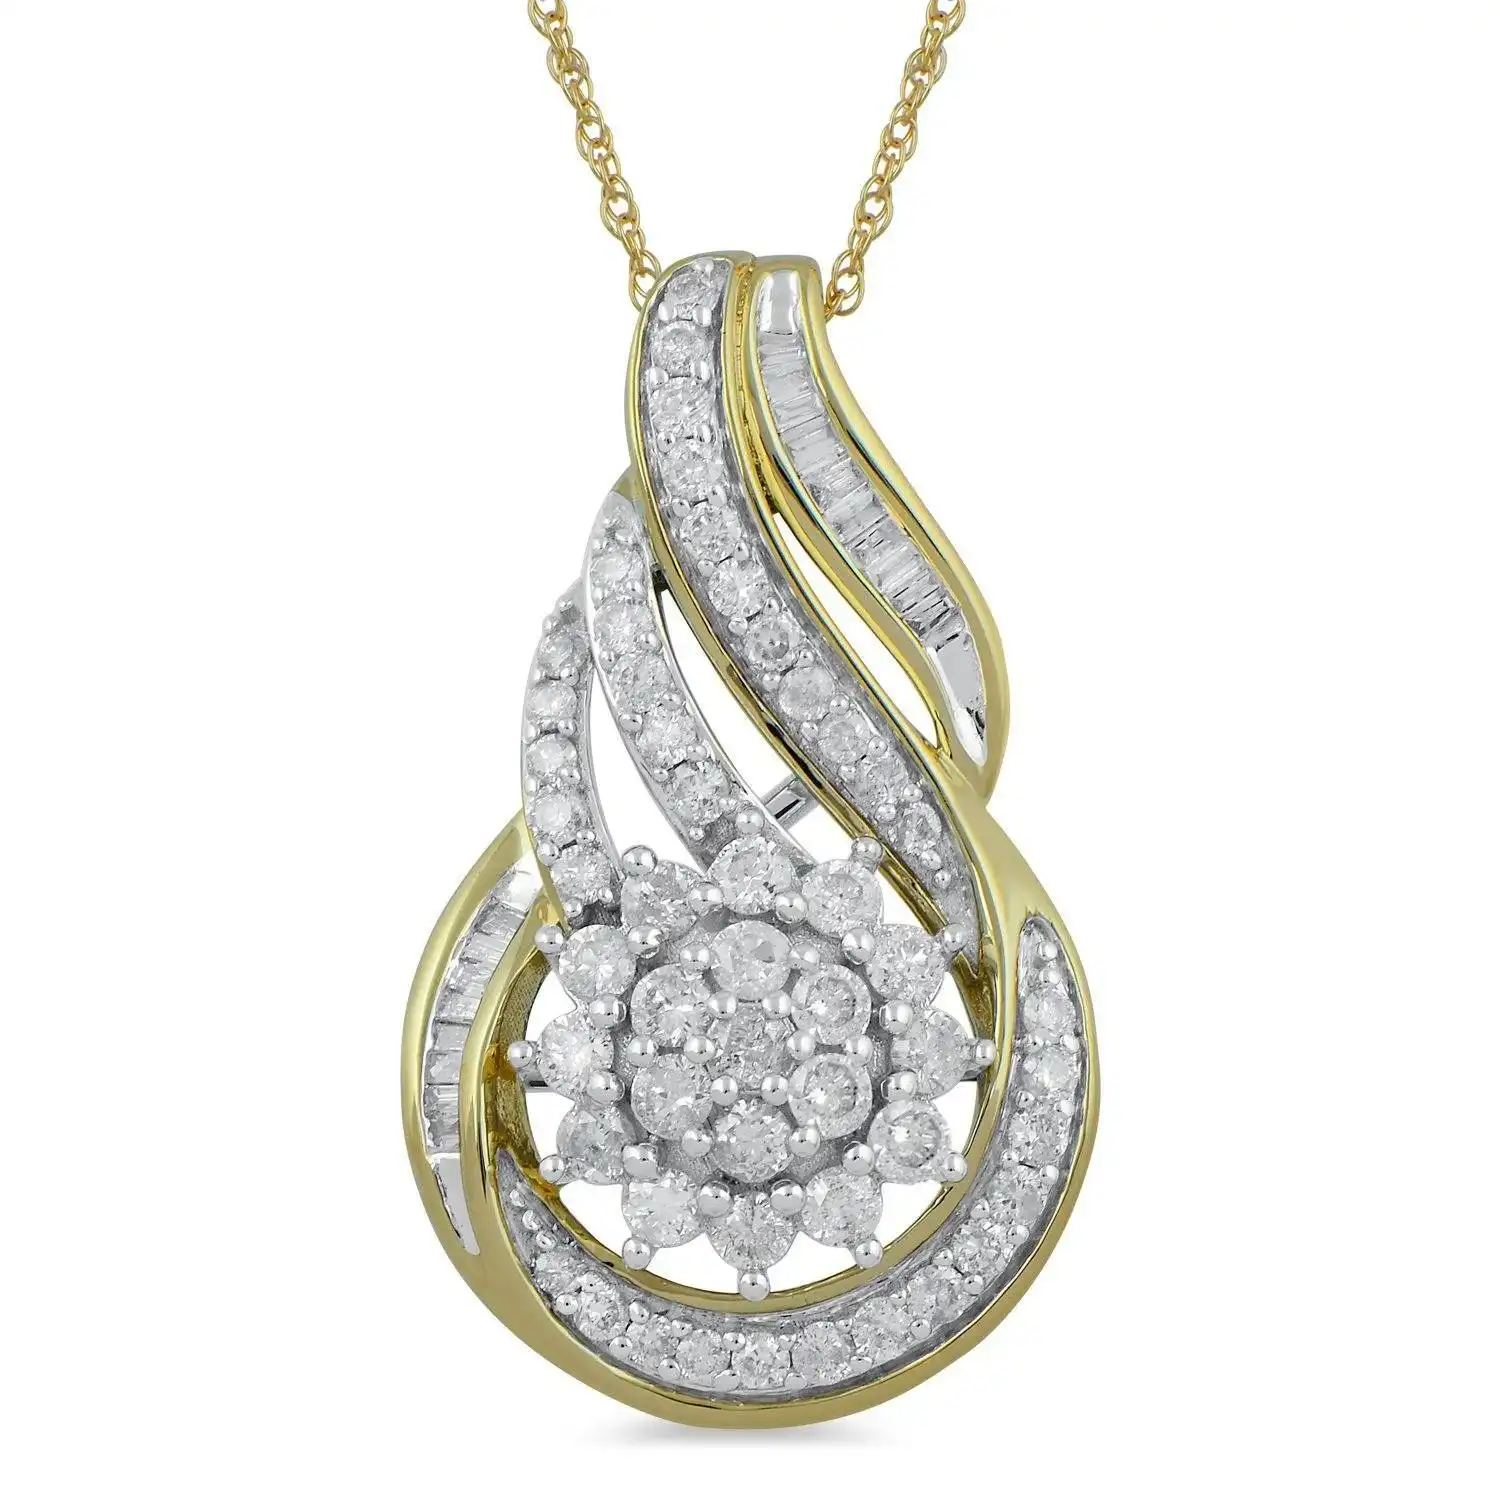 Flower Swirl Necklace with 1.00ct of Diamonds in 9ct Yellow Gold